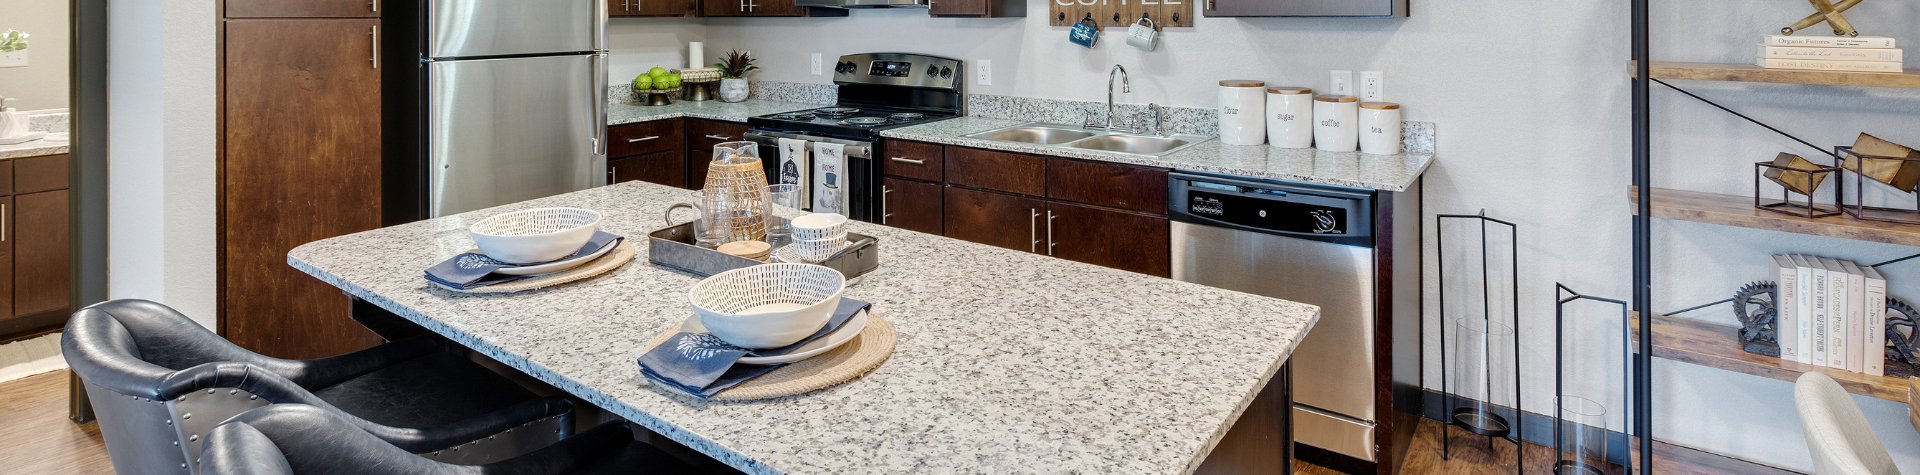 Luxury kitchen at Springs at Lakeline featuring granite counter tops and premium finishes.